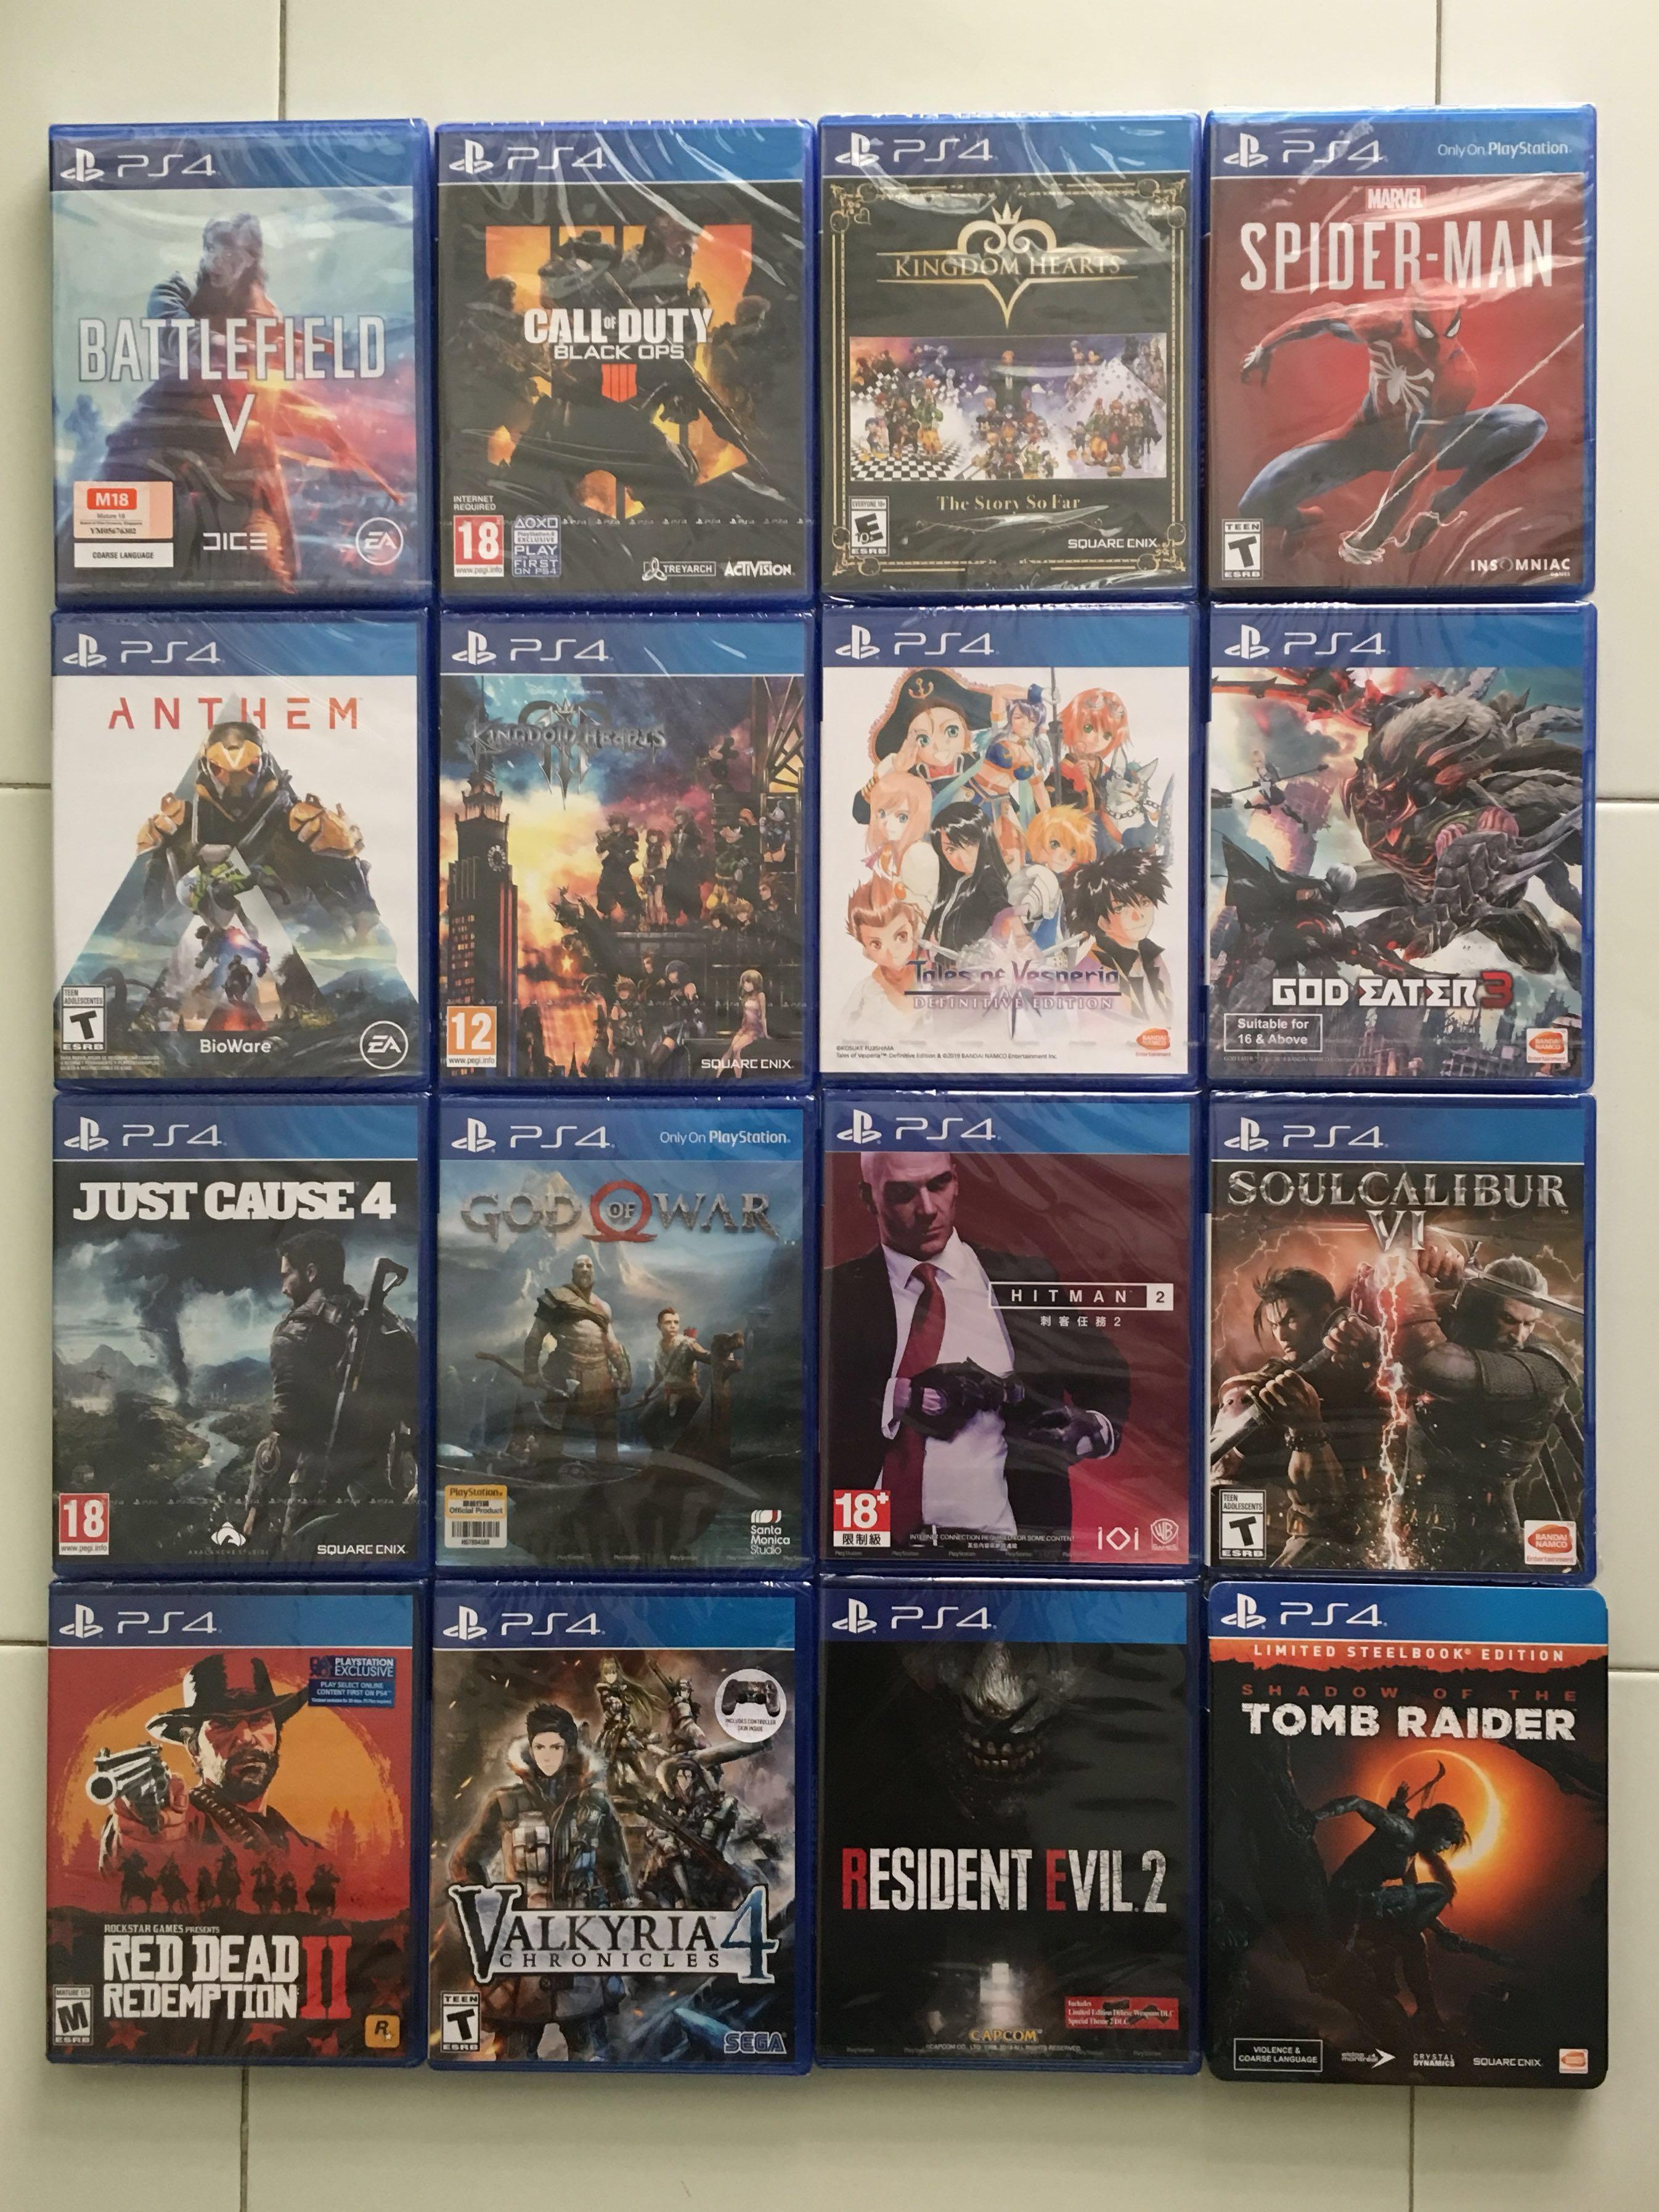 ps4 only on bundle